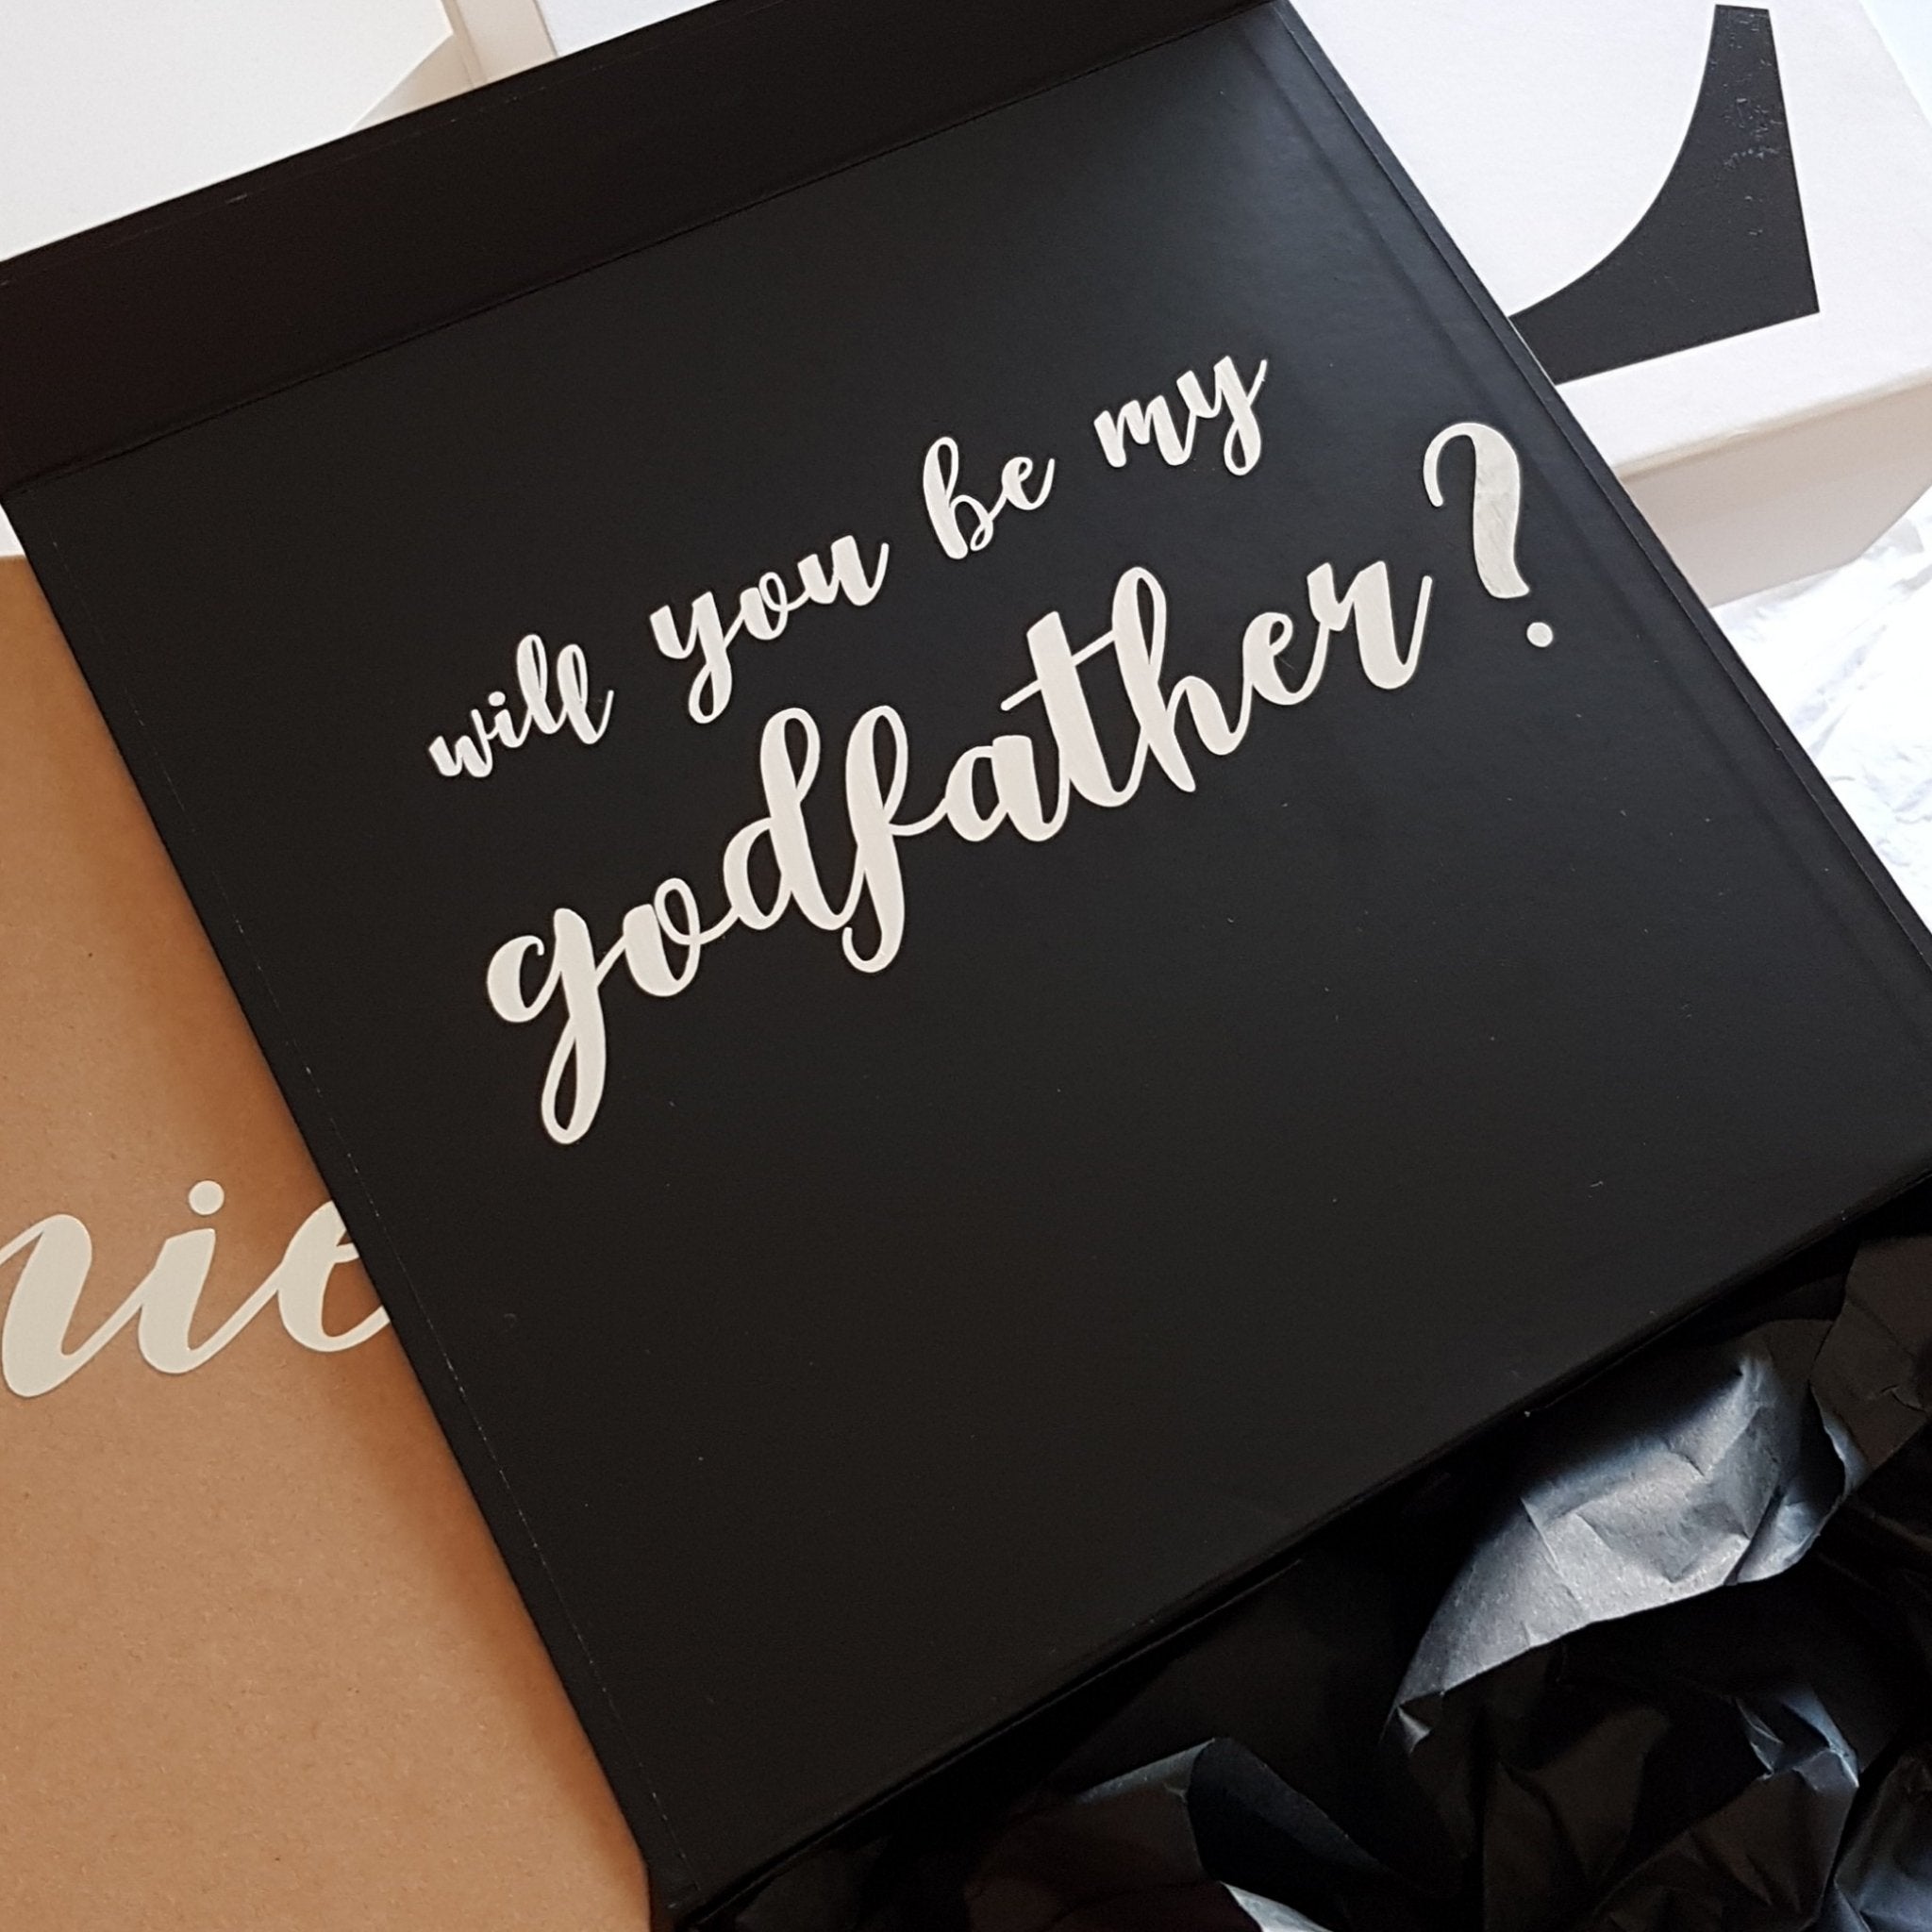 Will you be my? Godparents Ribbon Tied Hamper Box